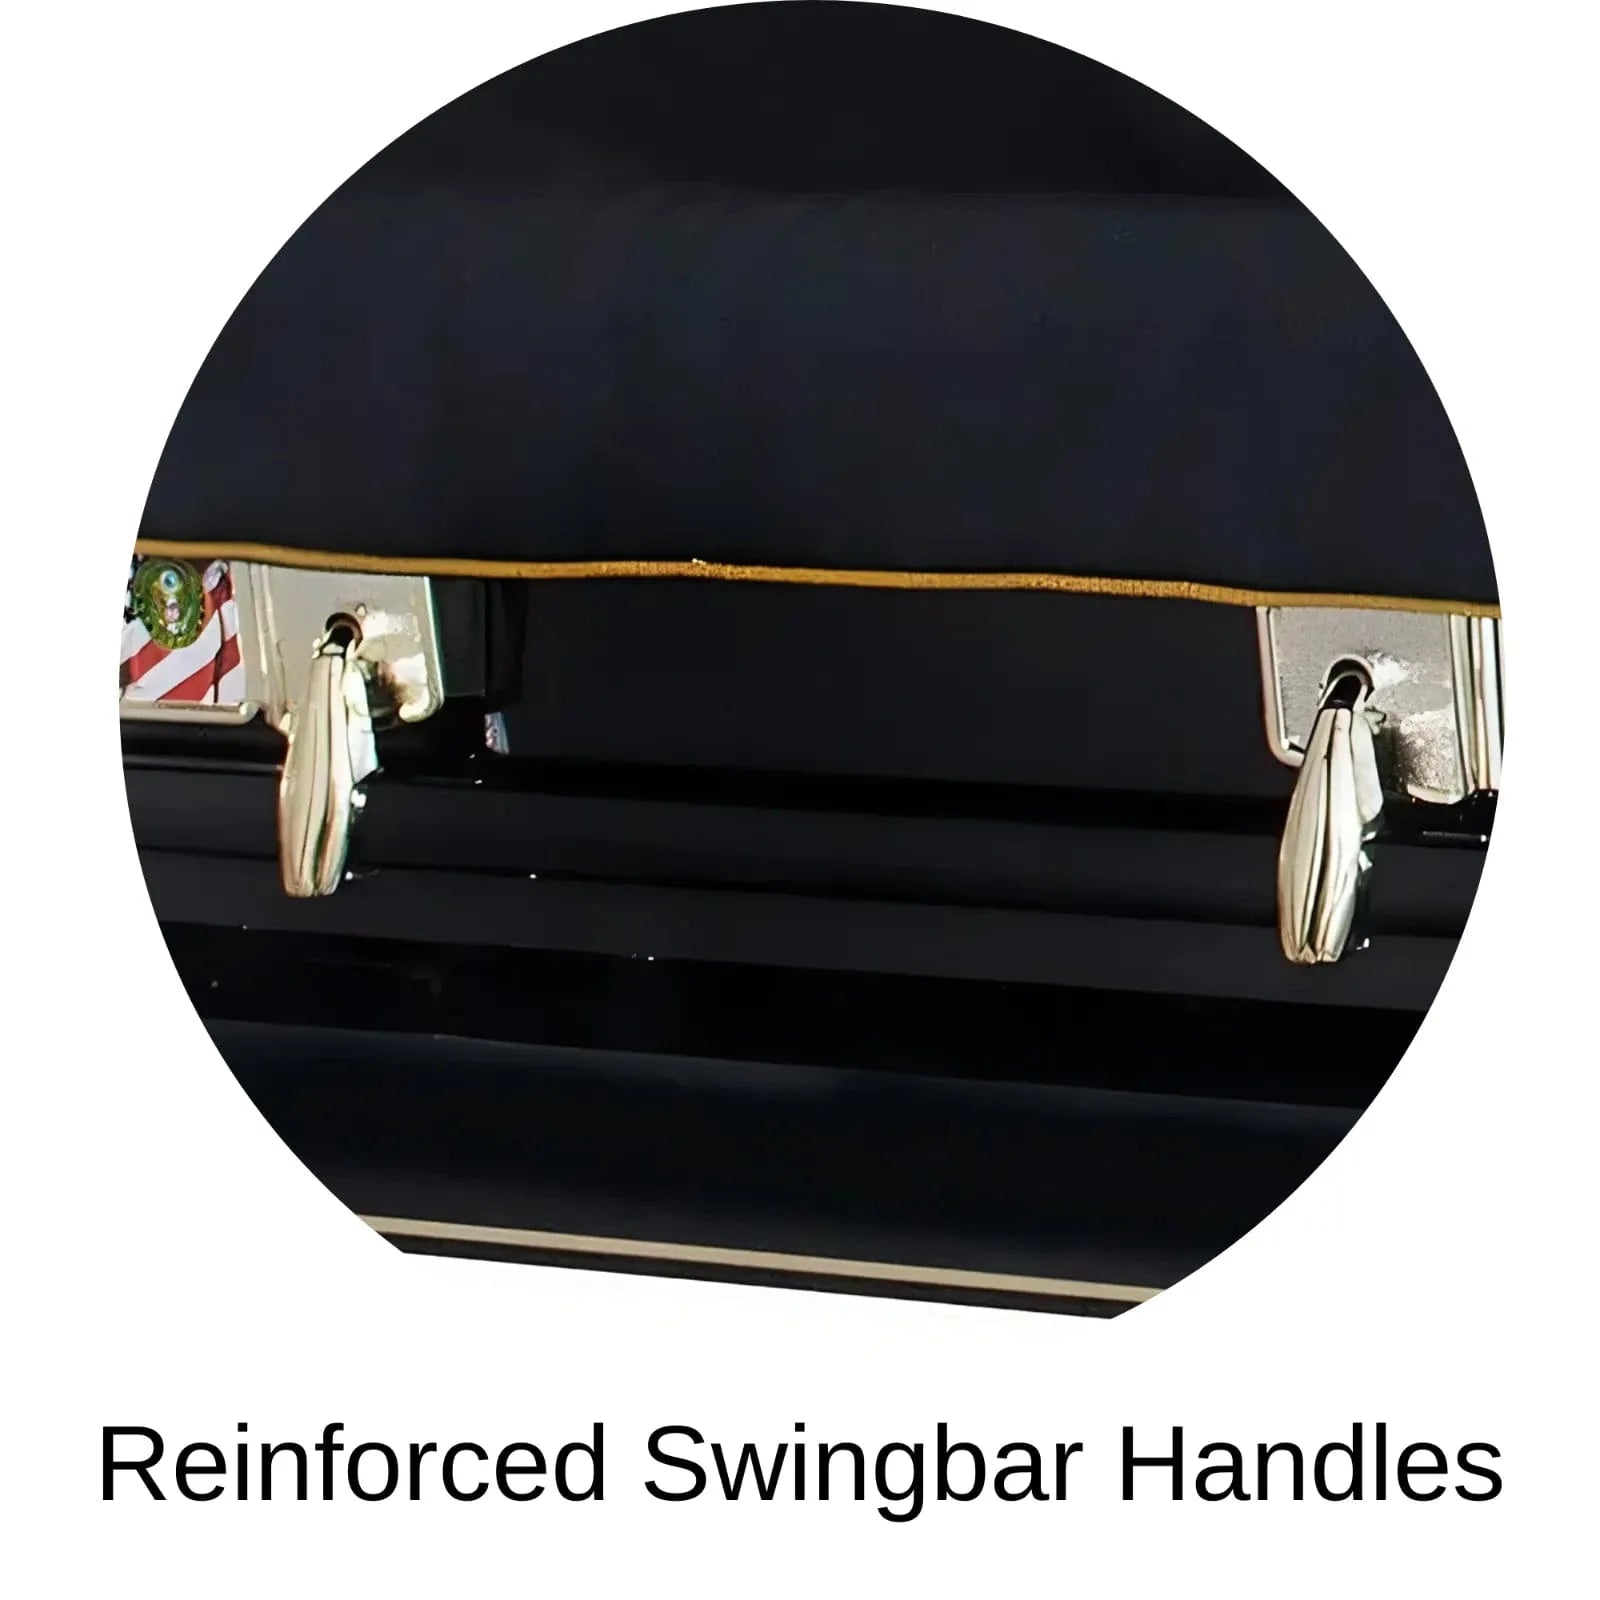 Military Casket With Reinforced Swing Bar Handles